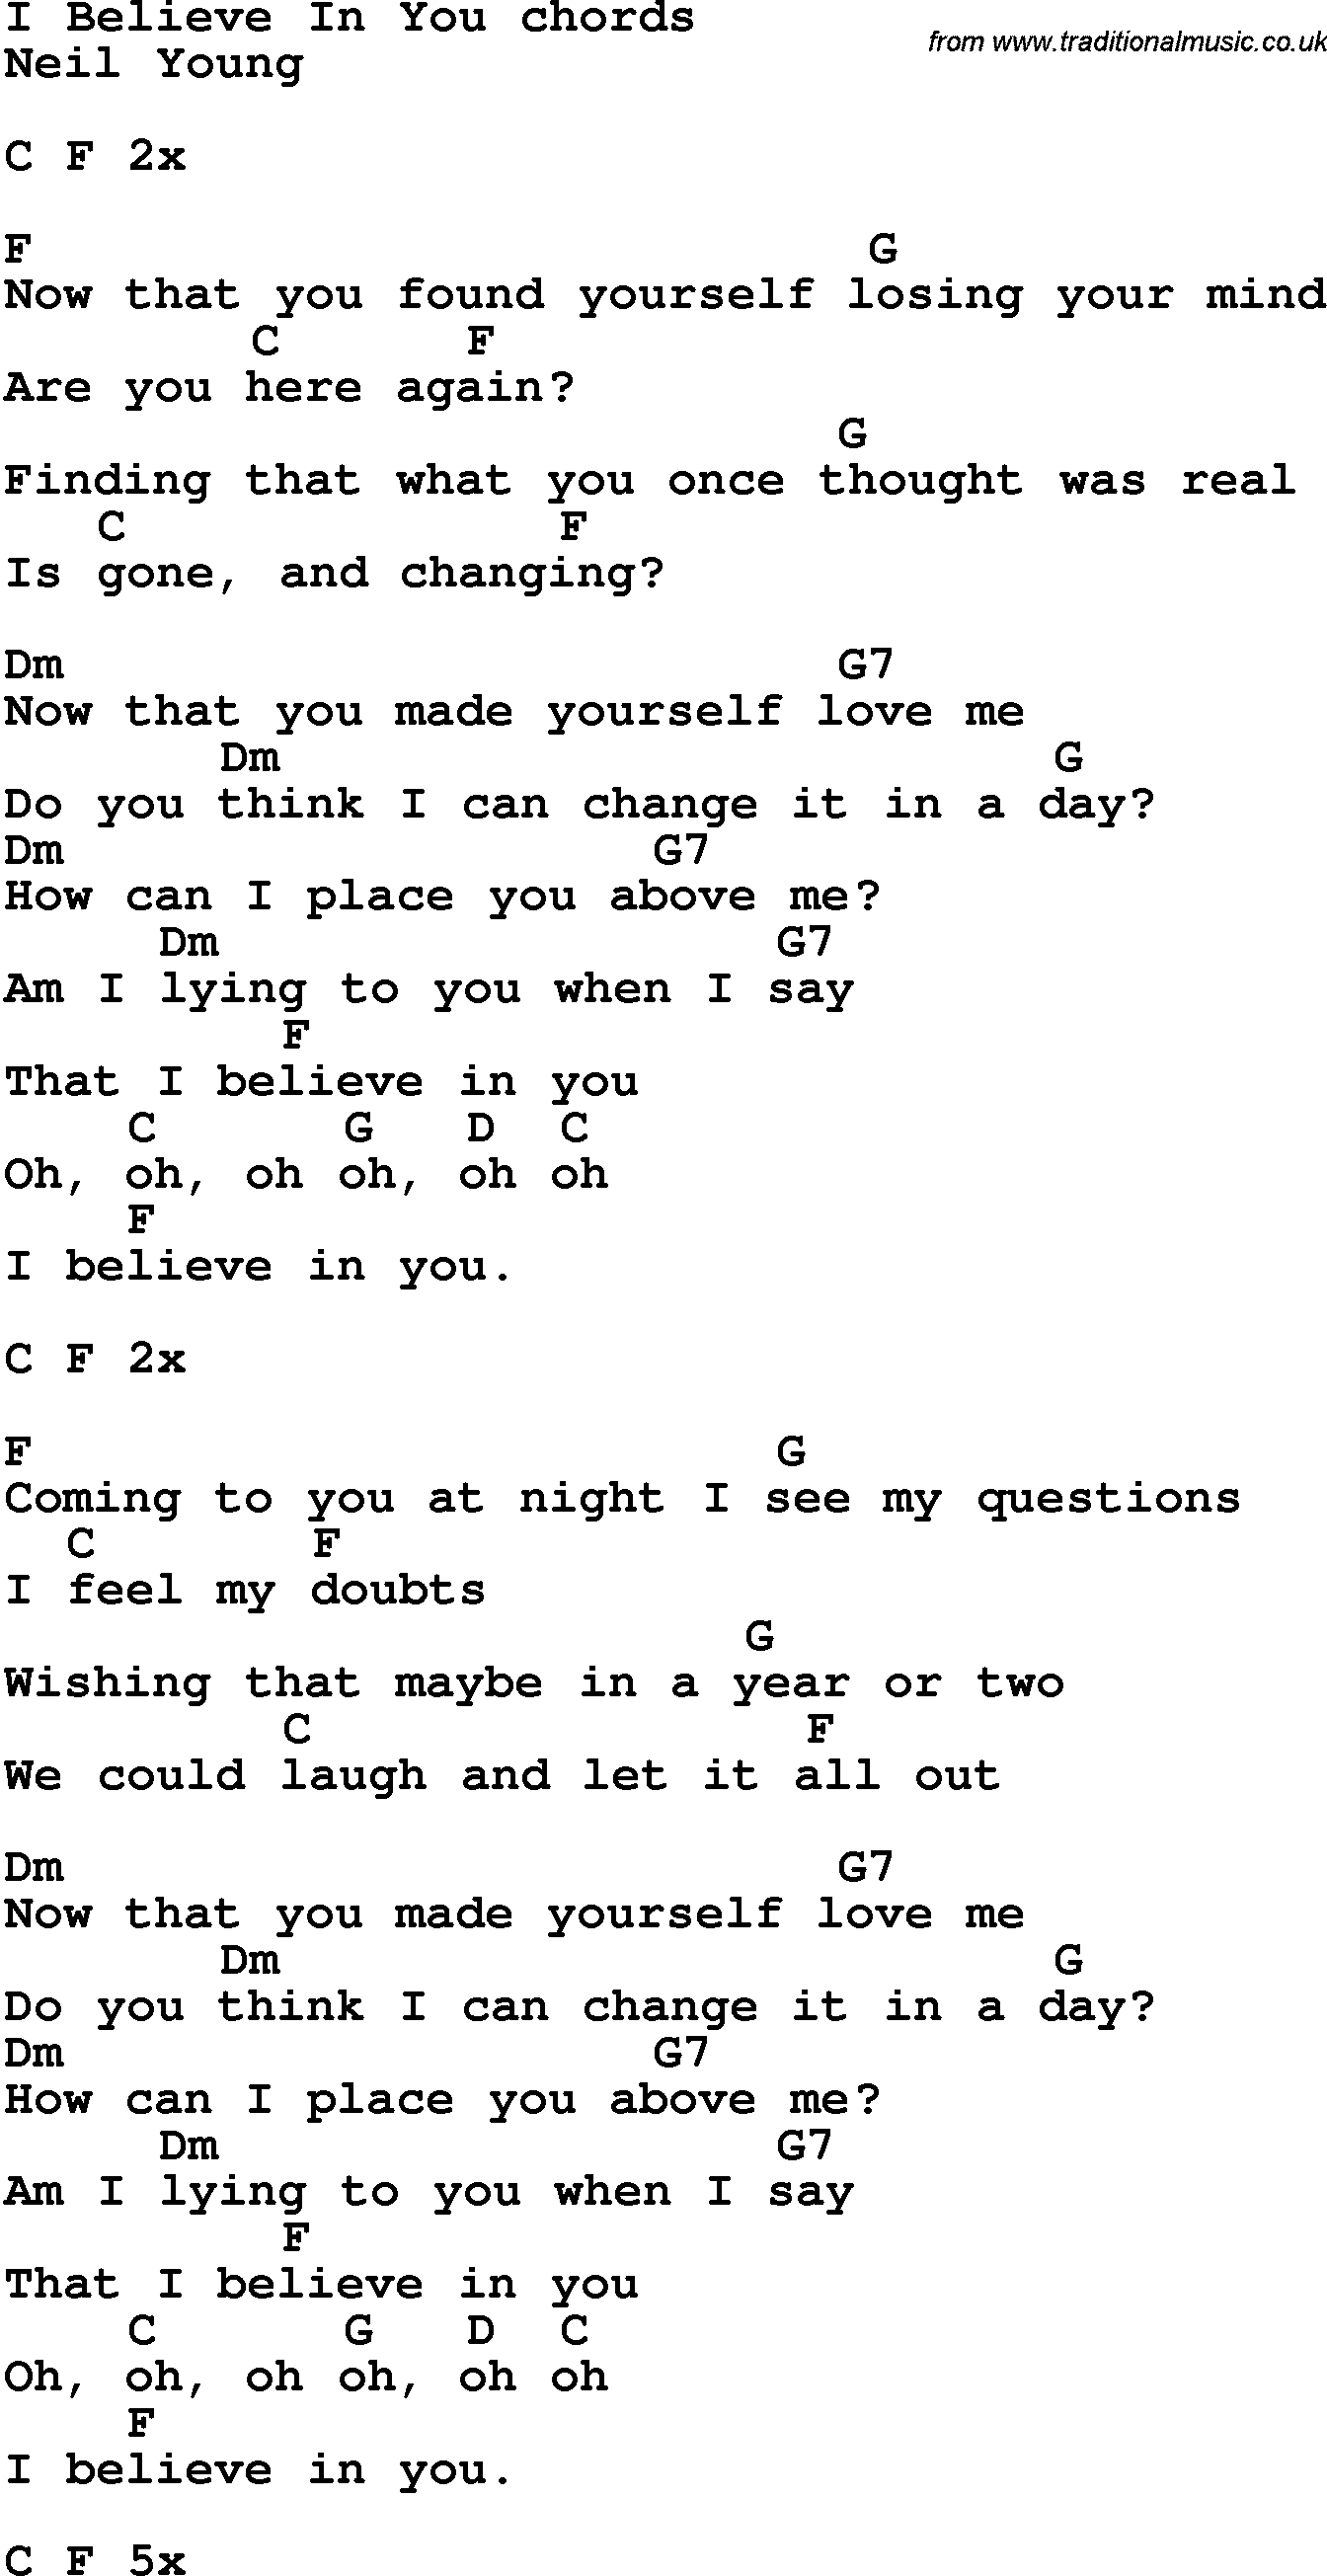 lyrics to neil young tell me why